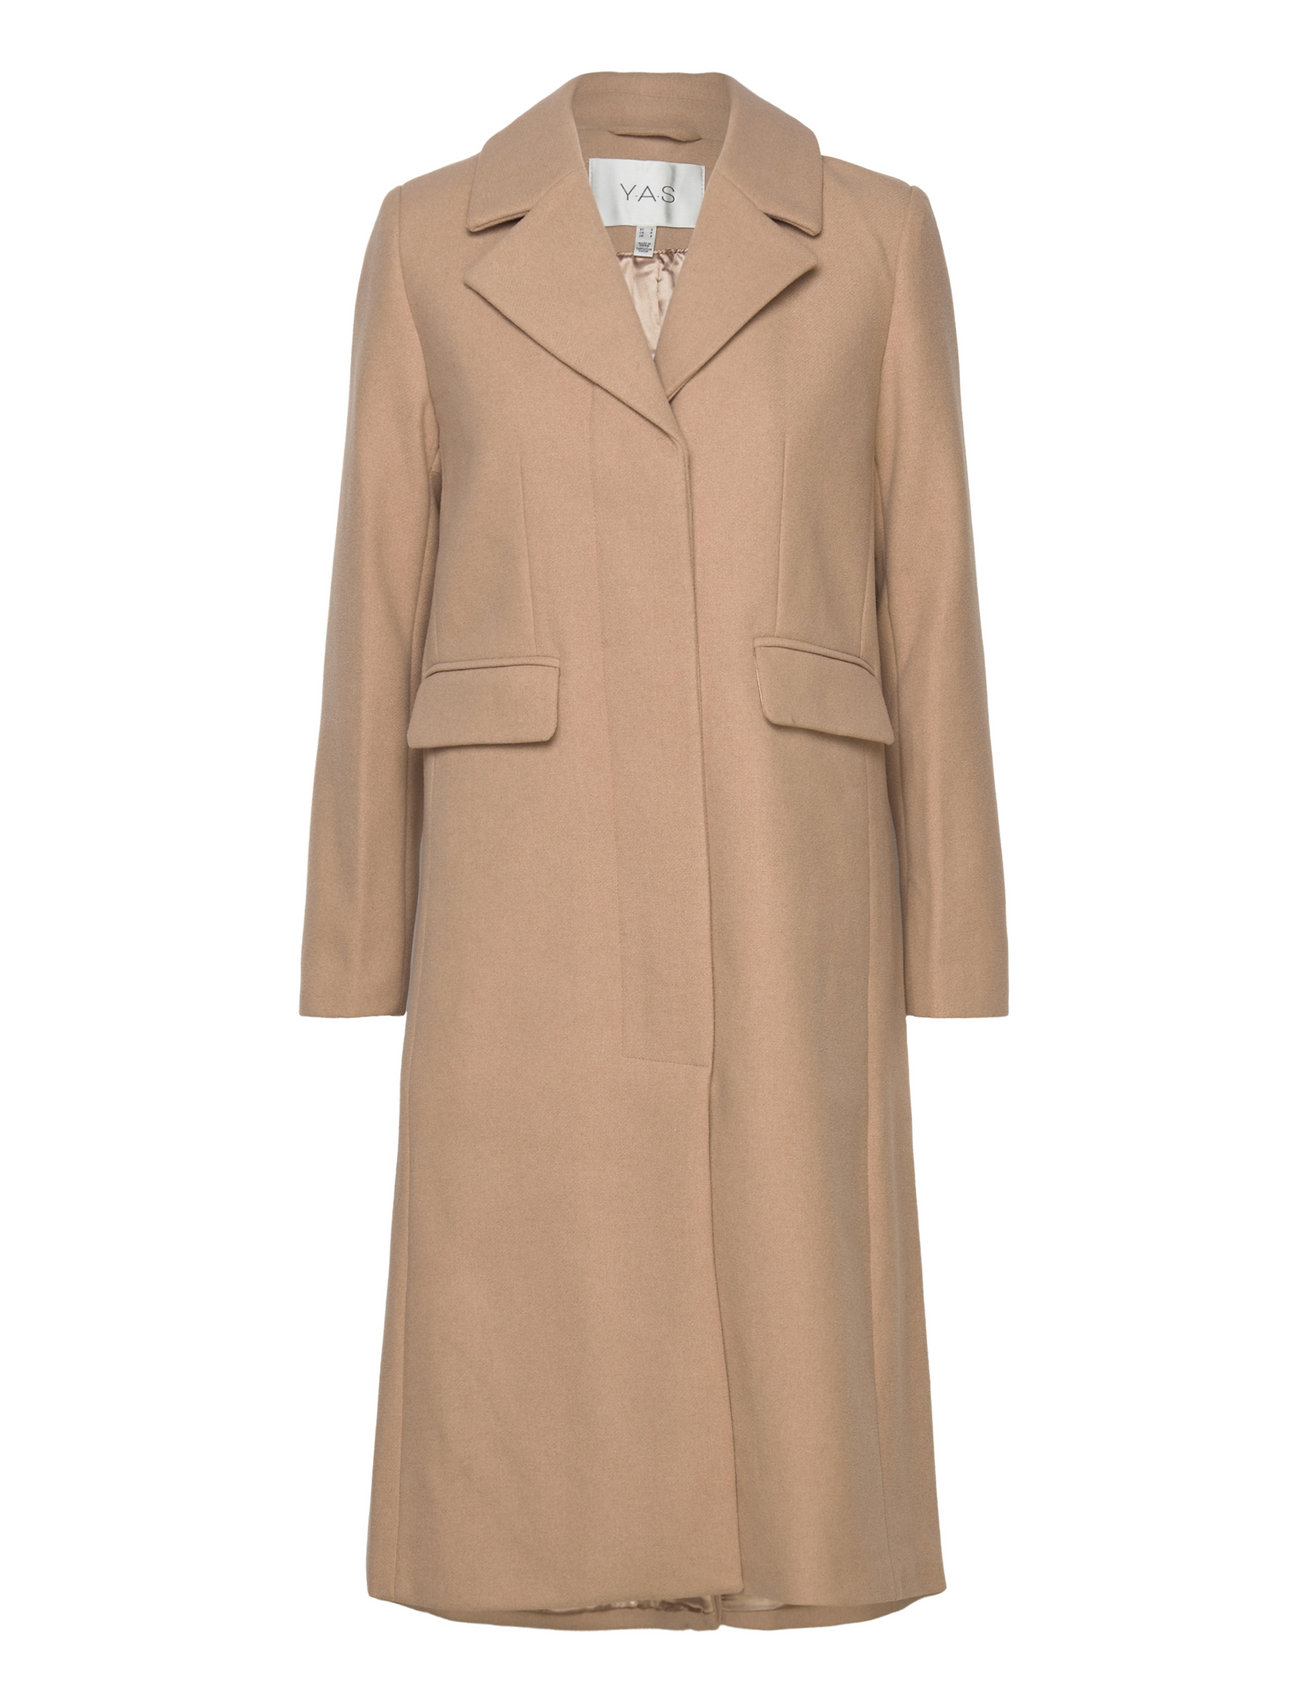 YAS Yaslima Ls Wool Mix Coat S. Noos - 70.00 €. Buy Winter Coats from YAS  online at Boozt.com. Fast delivery and easy returns